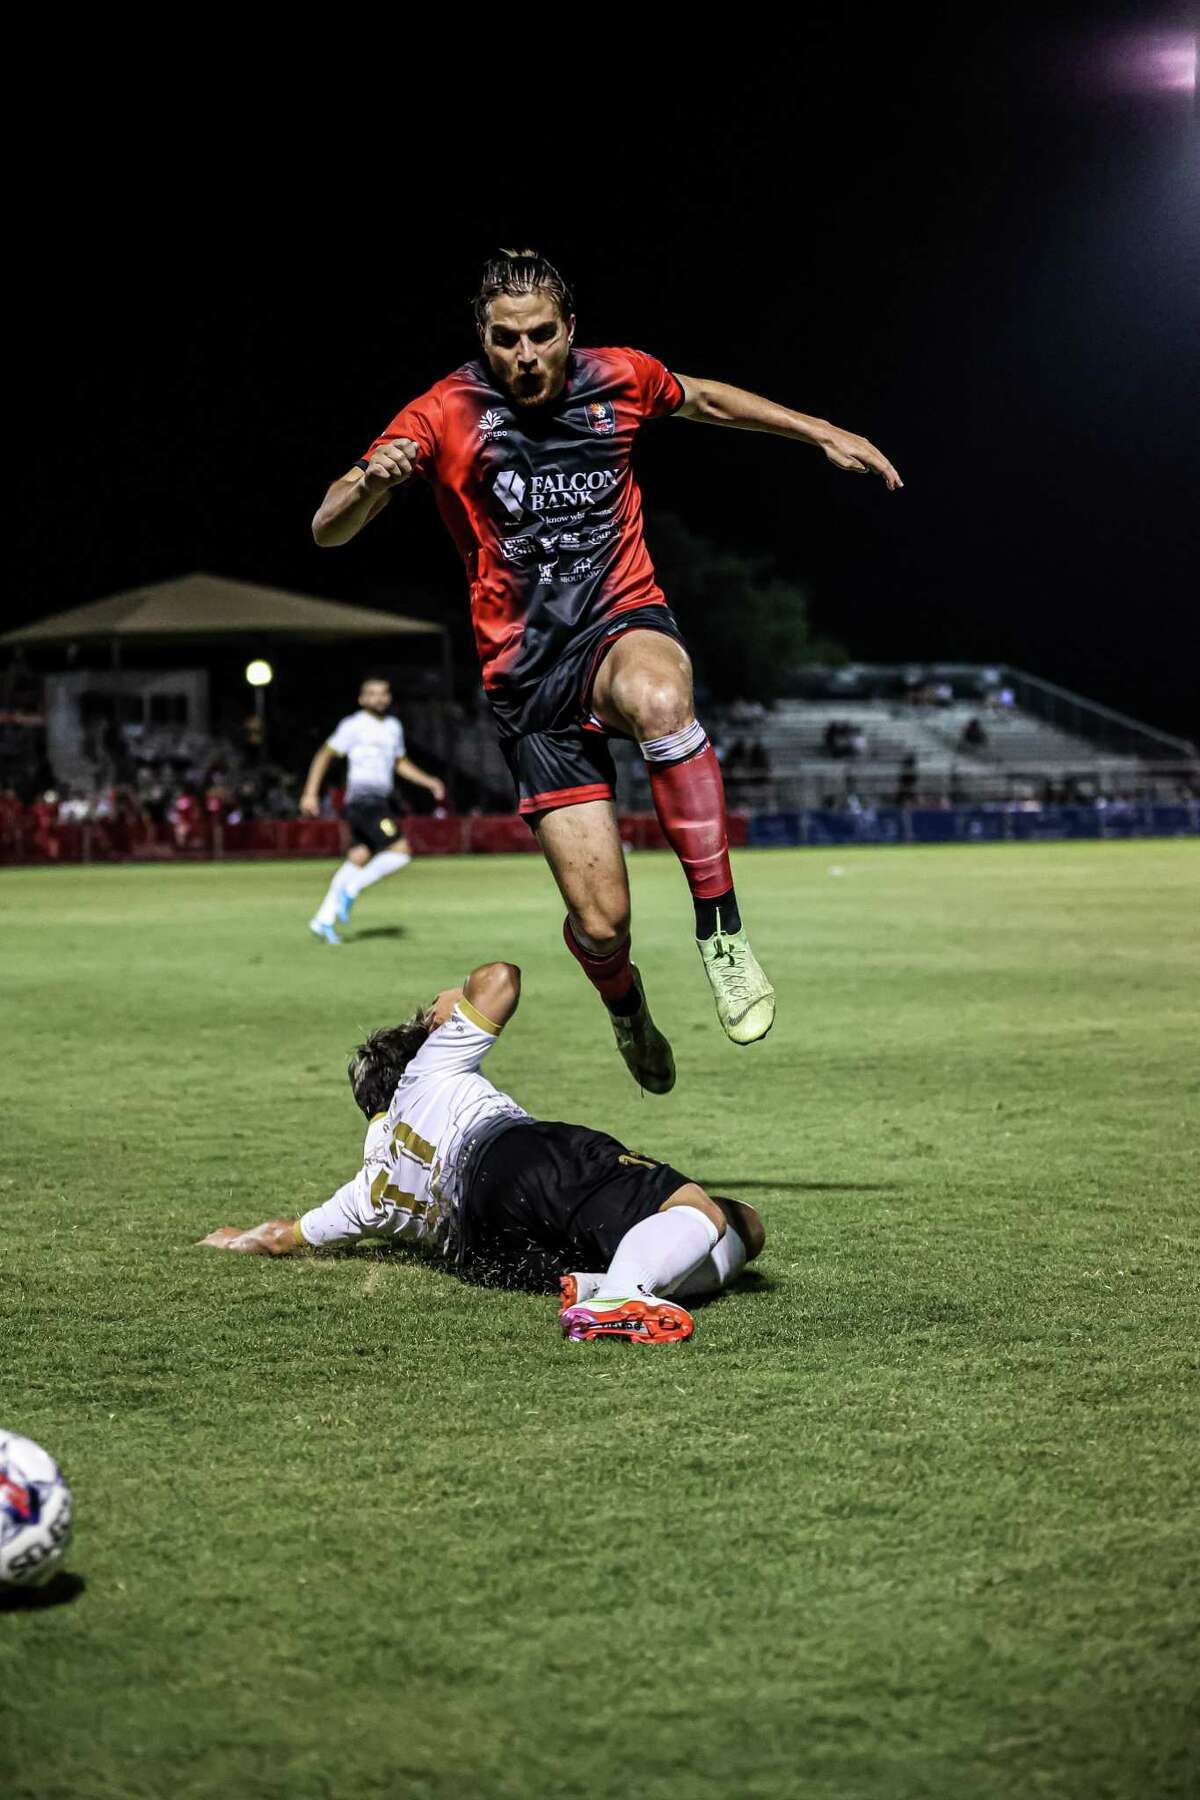 Dimitrios Leonoglu scored his first goal in four years in Laredo’s 3-0 win over the Lubbock Matadors on Thursday.